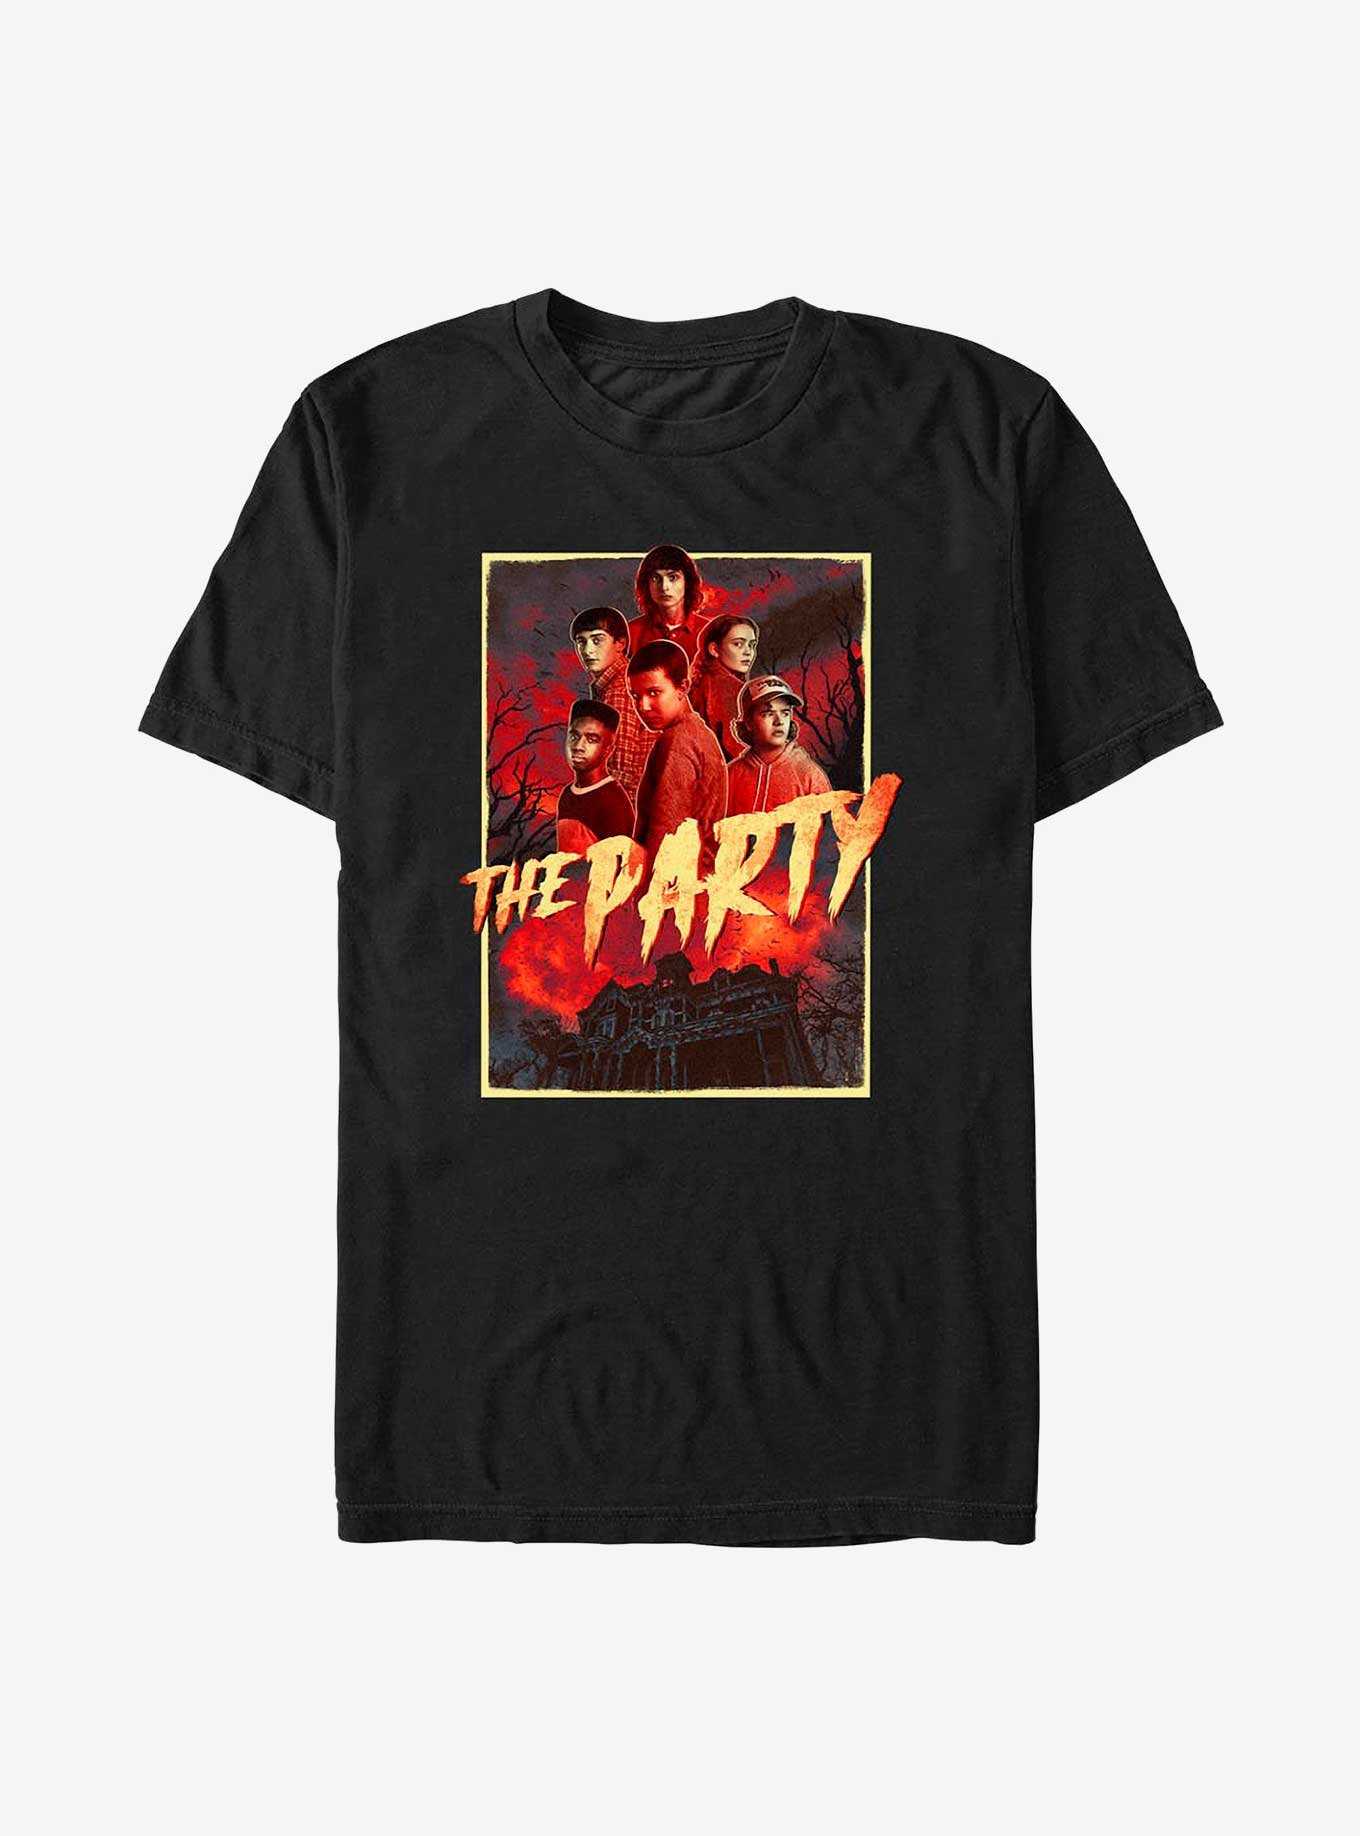 Stranger Things The Party T-Shirt, , hi-res